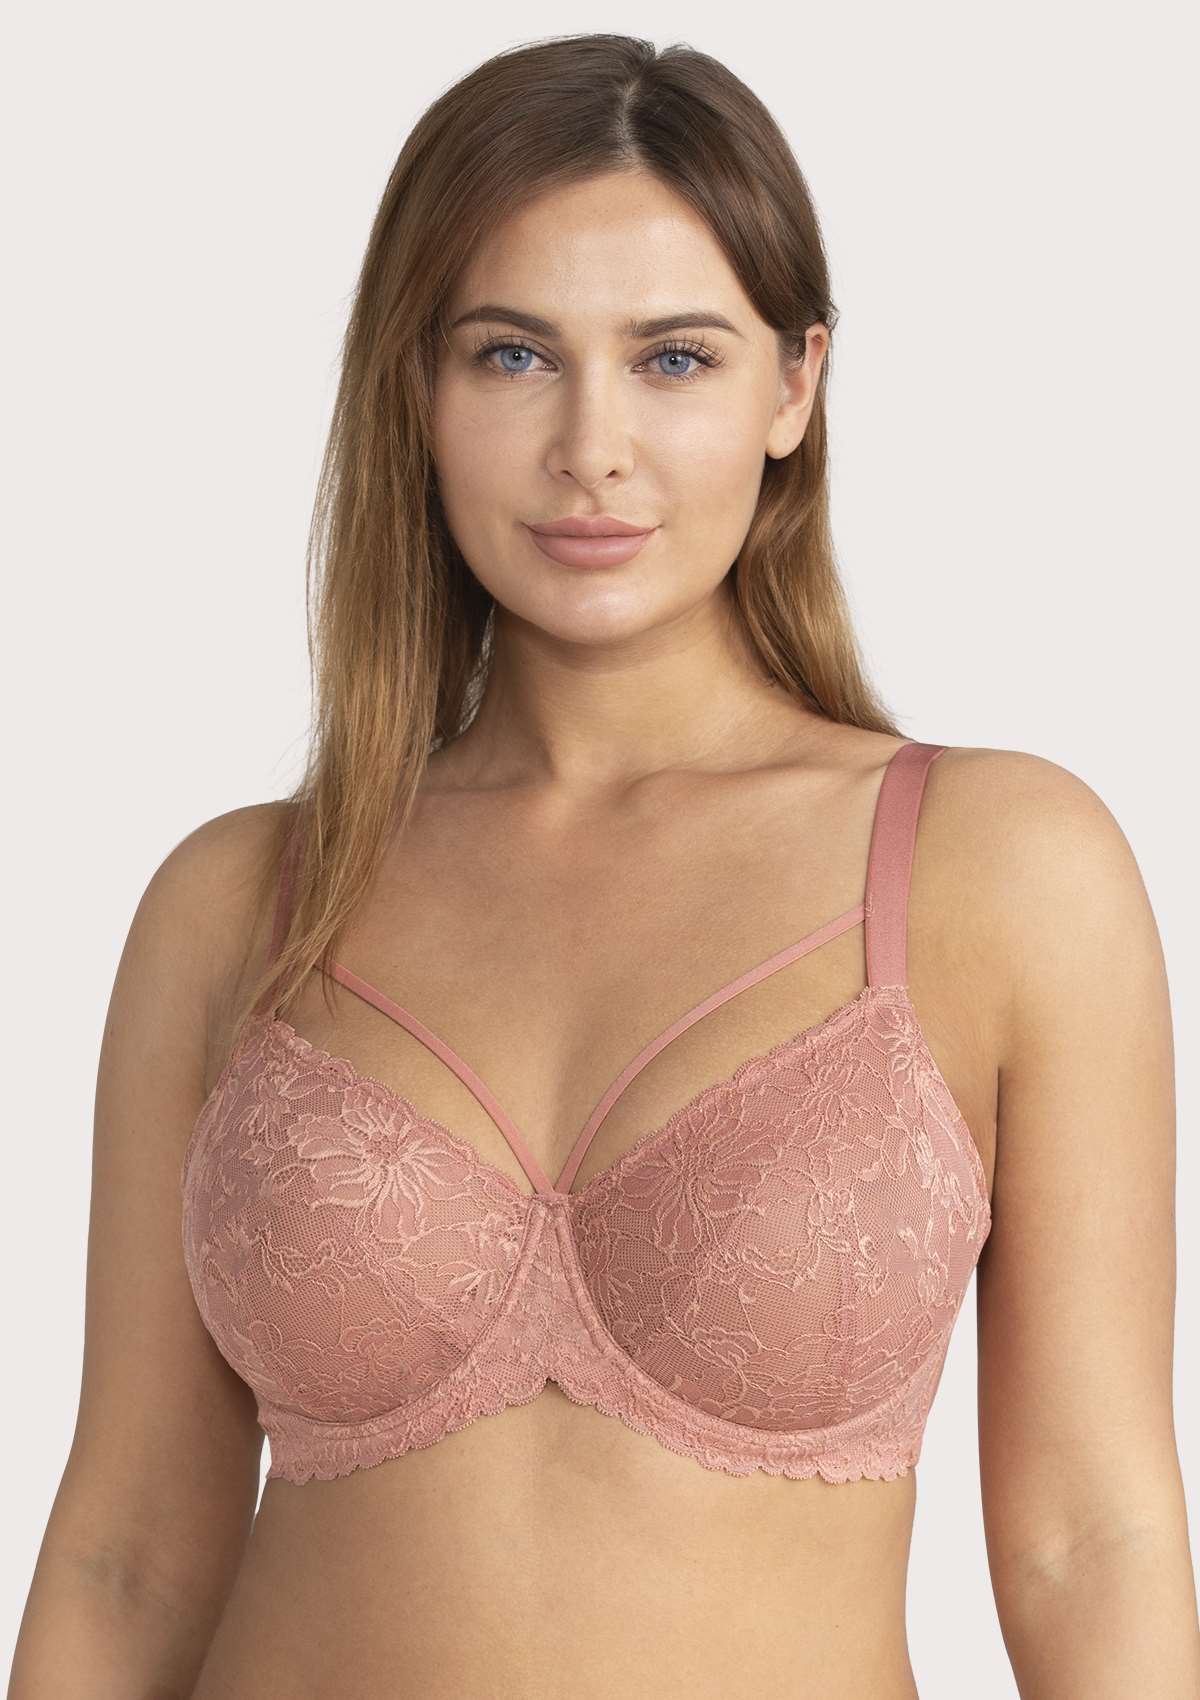 HSIA Pretty In Petals Lace Bra And Panty Sets: Bra For Big Boobs - Light Coral / 42 / C